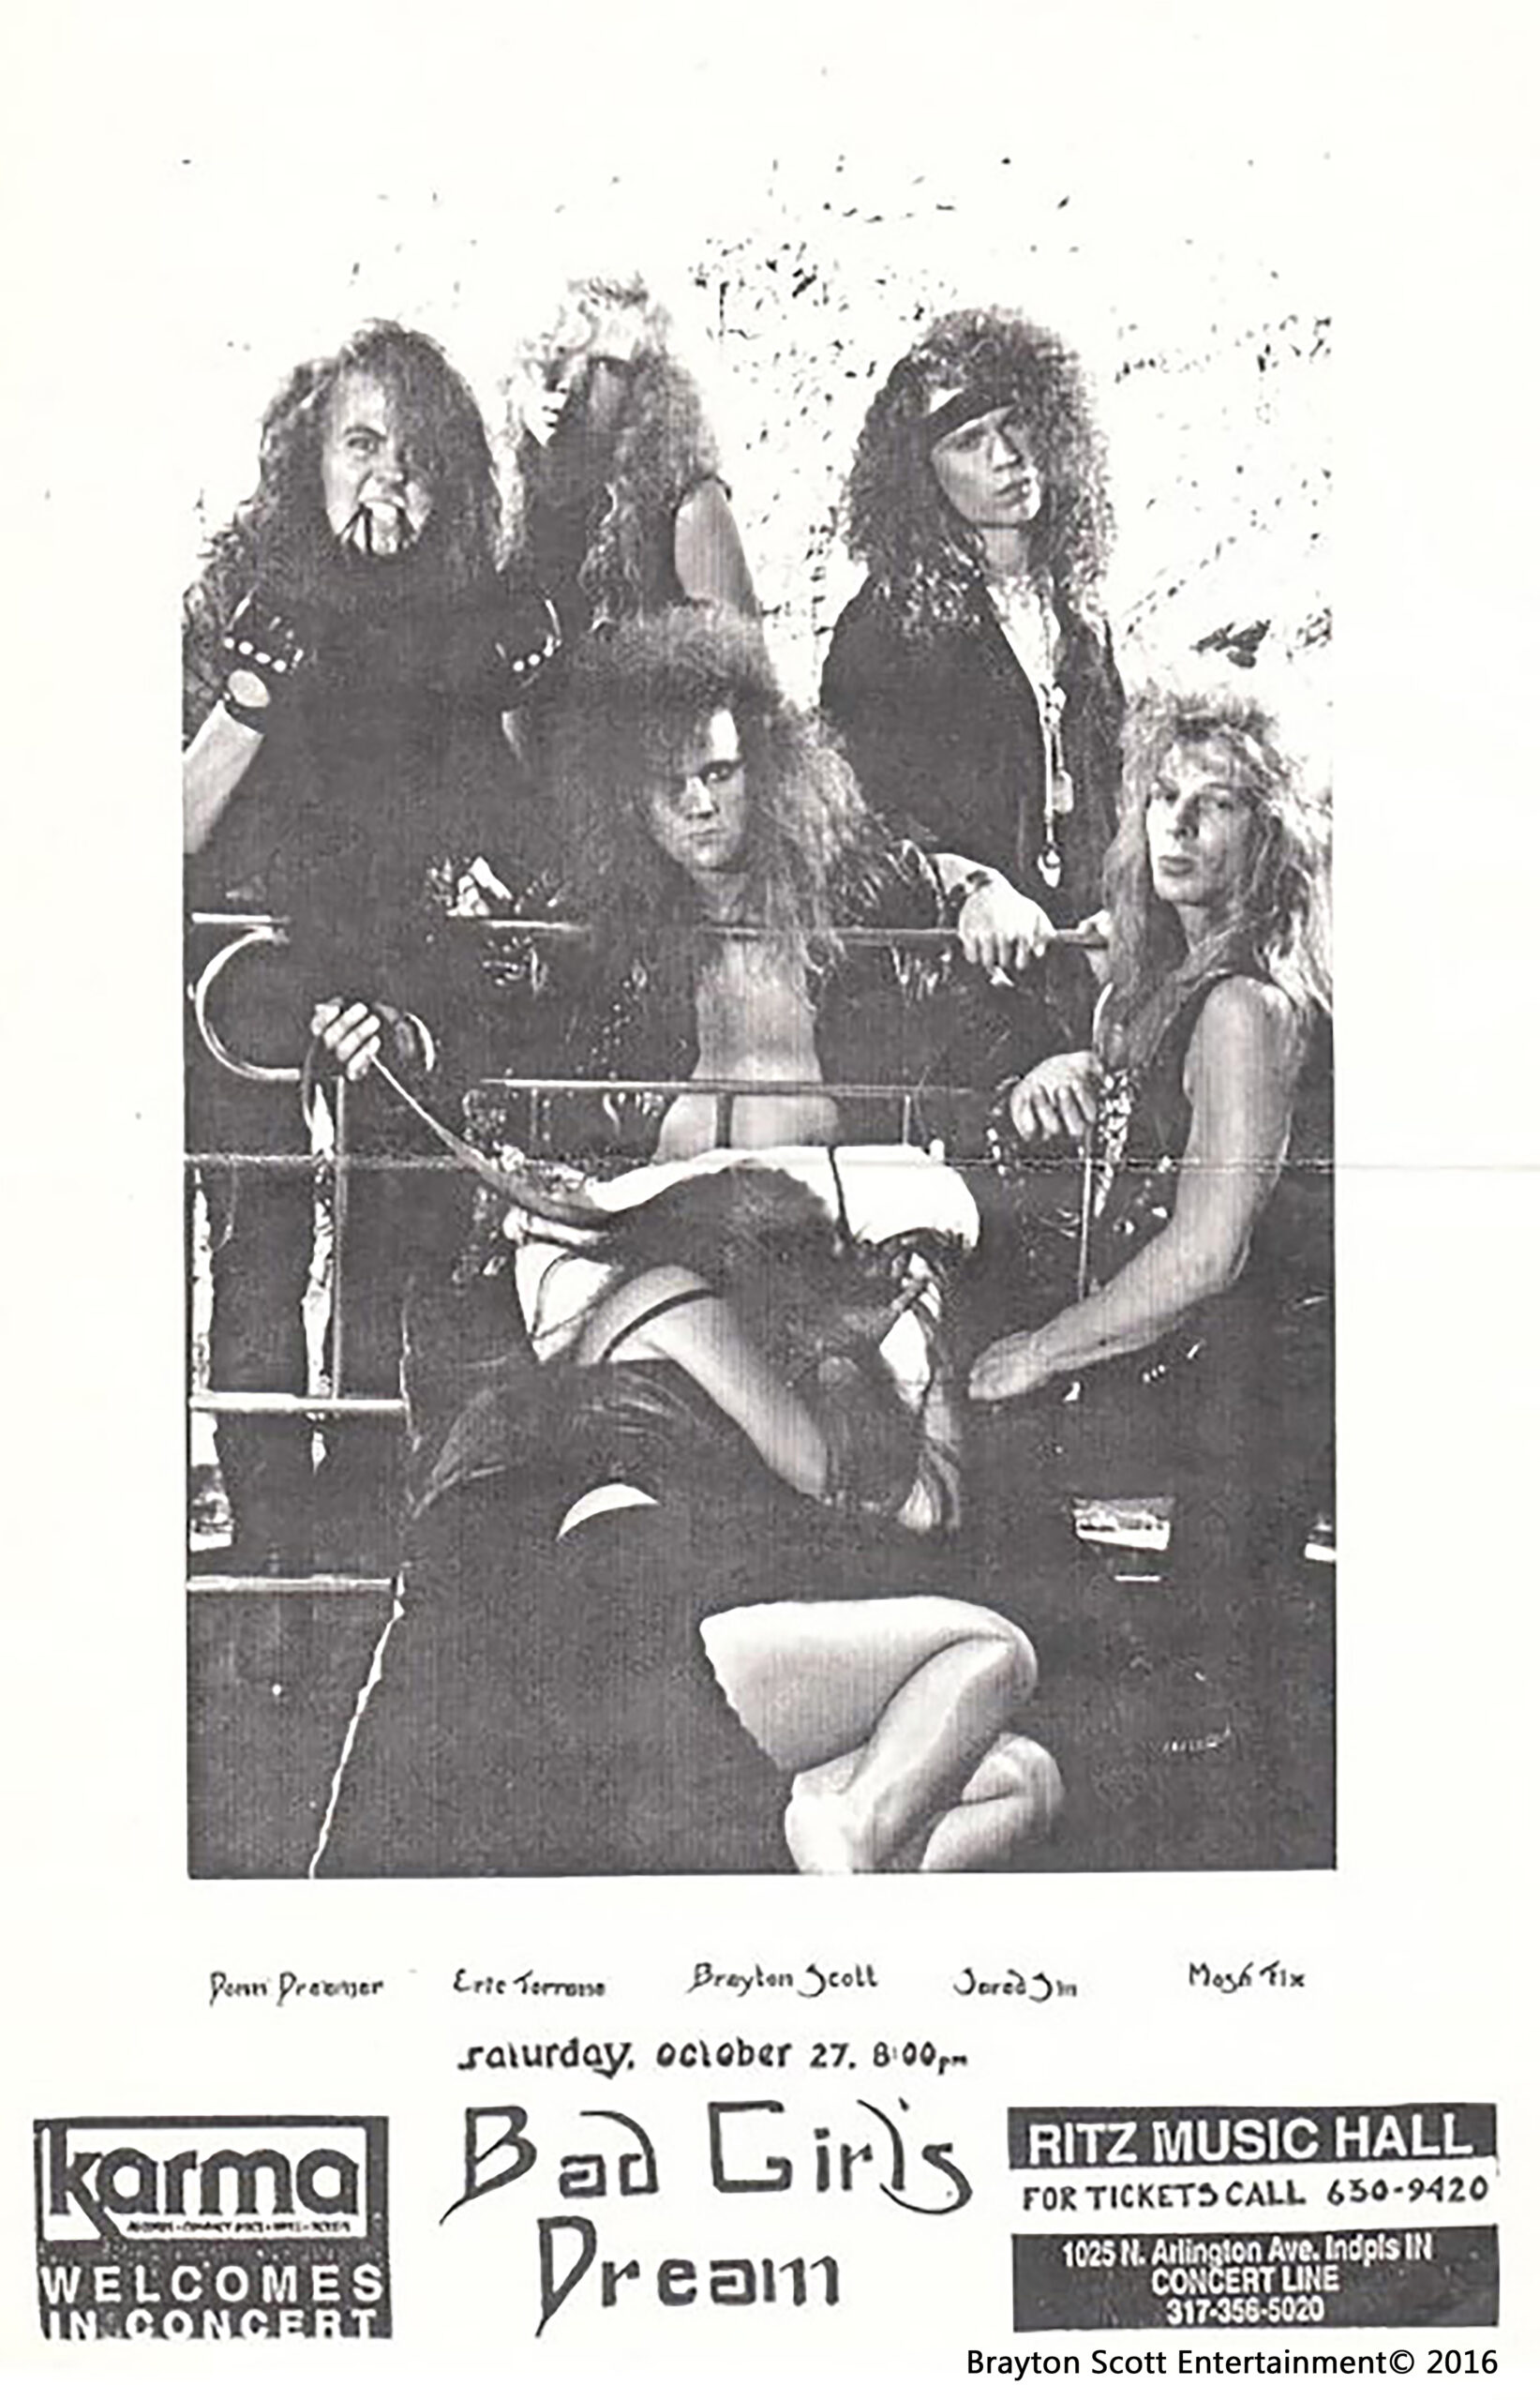 Image of Bad Girls Dream 1990 Concert Announcement Dueling Worlds© International